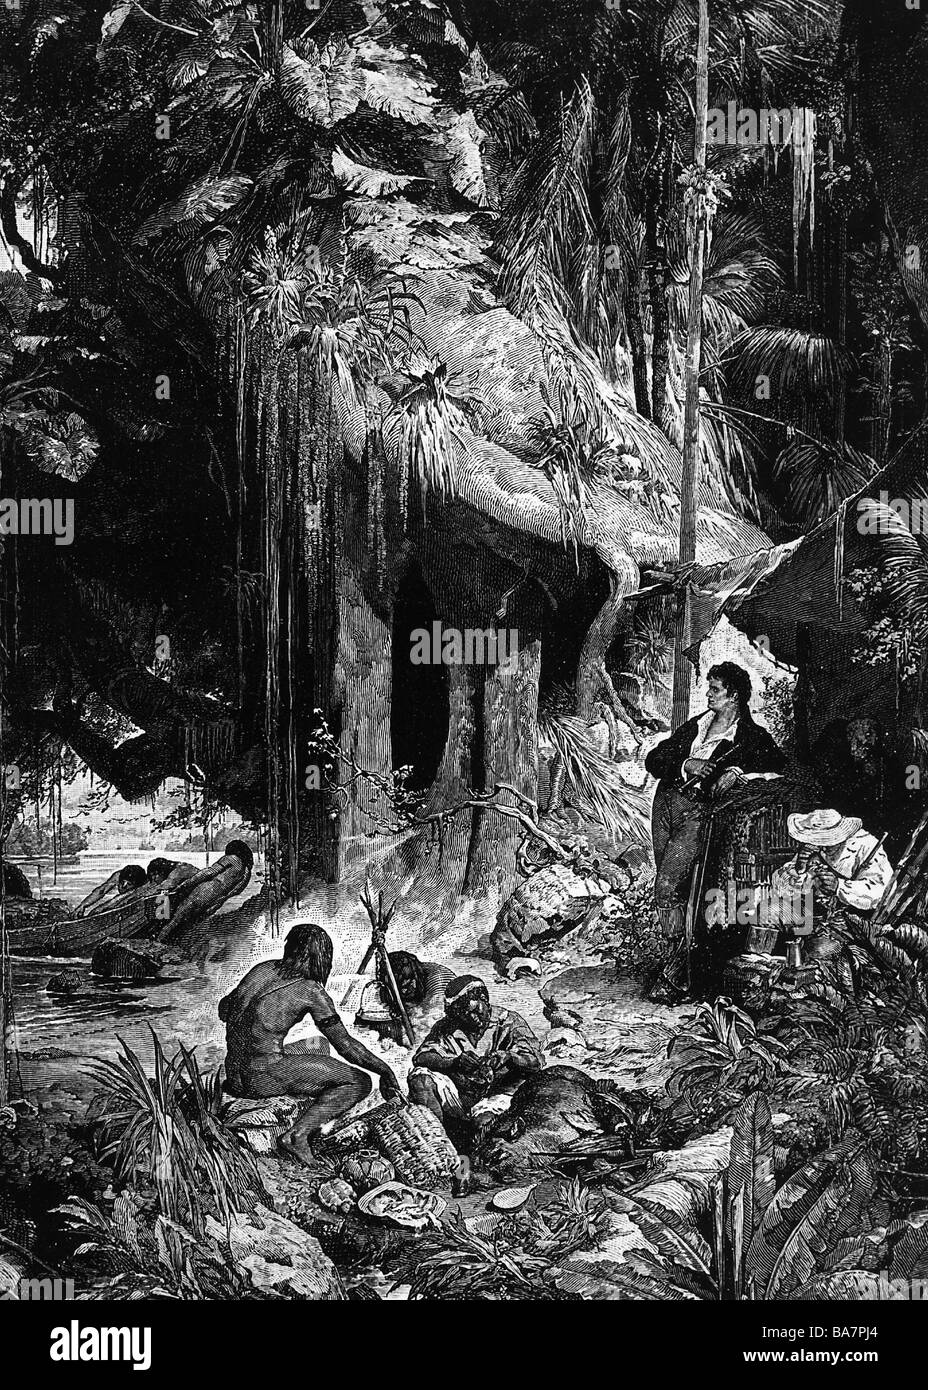 Humboldt, Alexander von, 14.9.1769 - 6.5.1859, German scientist (naturalist and geographer), full length, with Bonpland at Orinoco, print after painting by Ferdinand Keller, Stock Photo